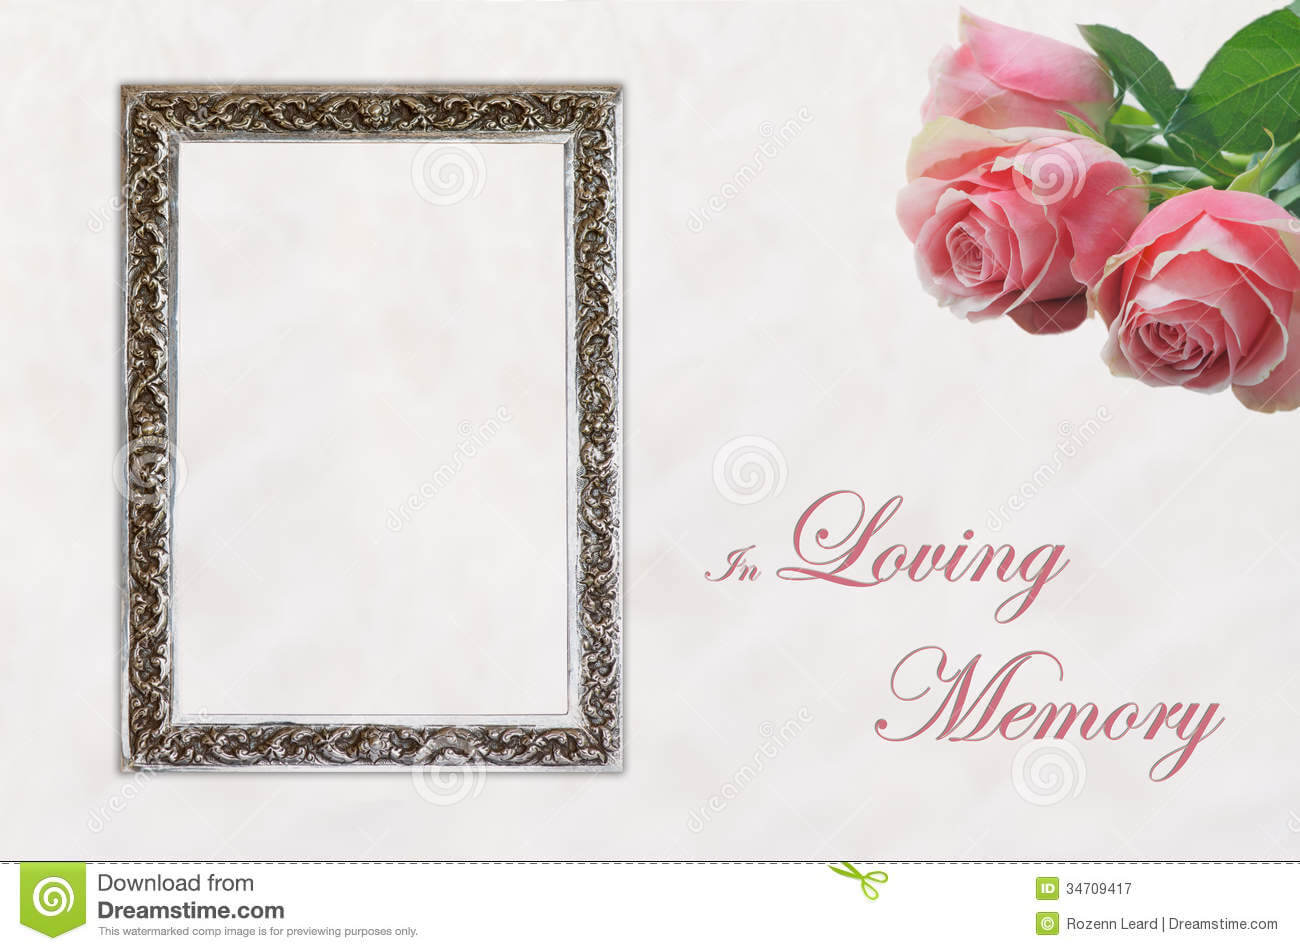 In Memory Cards Templates ] – Memory Template 4 Celebration With In Memory Cards Templates